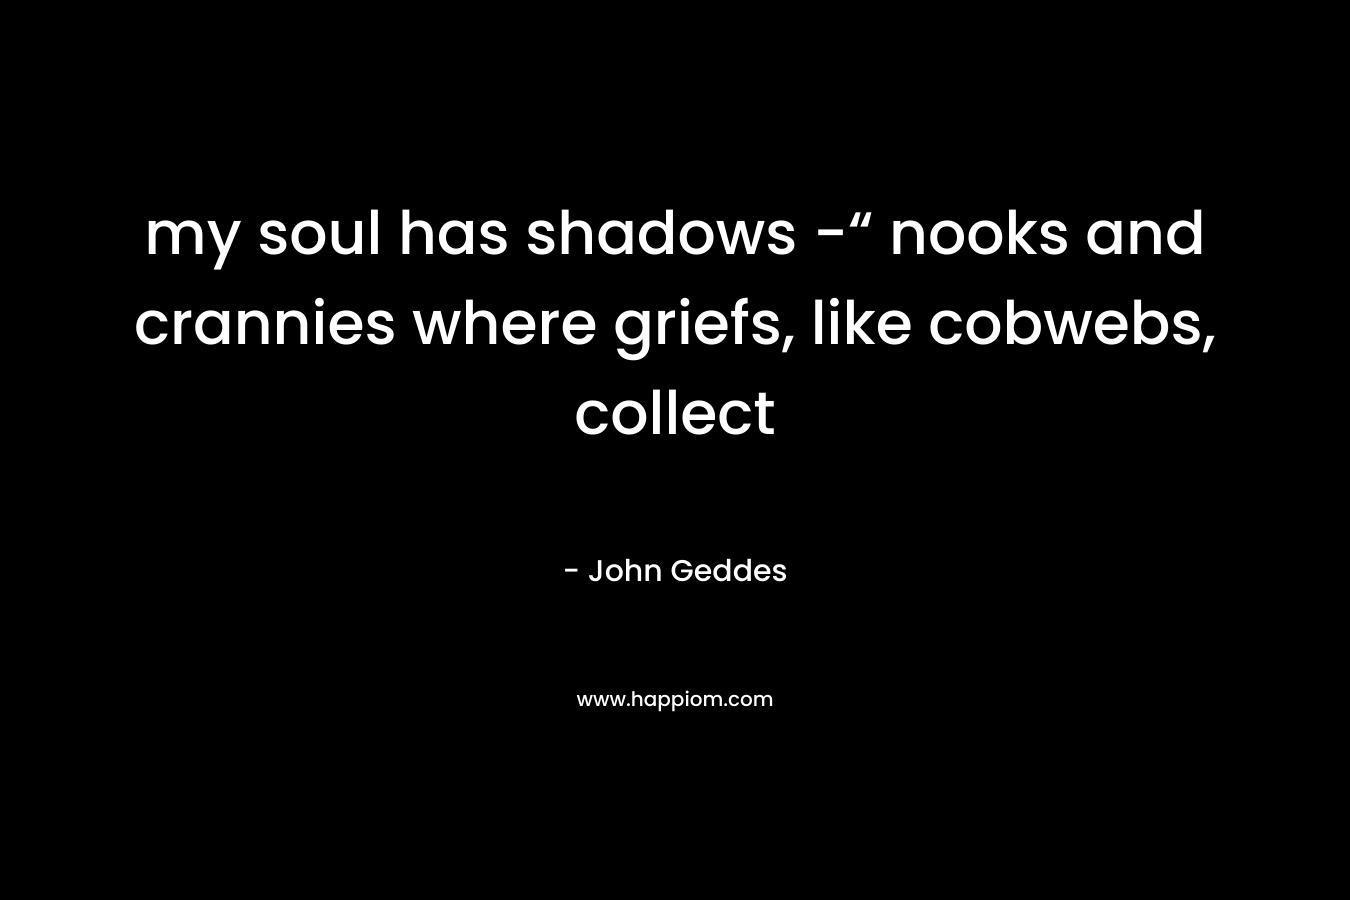 my soul has shadows -“ nooks and crannies where griefs, like cobwebs, collect – John Geddes